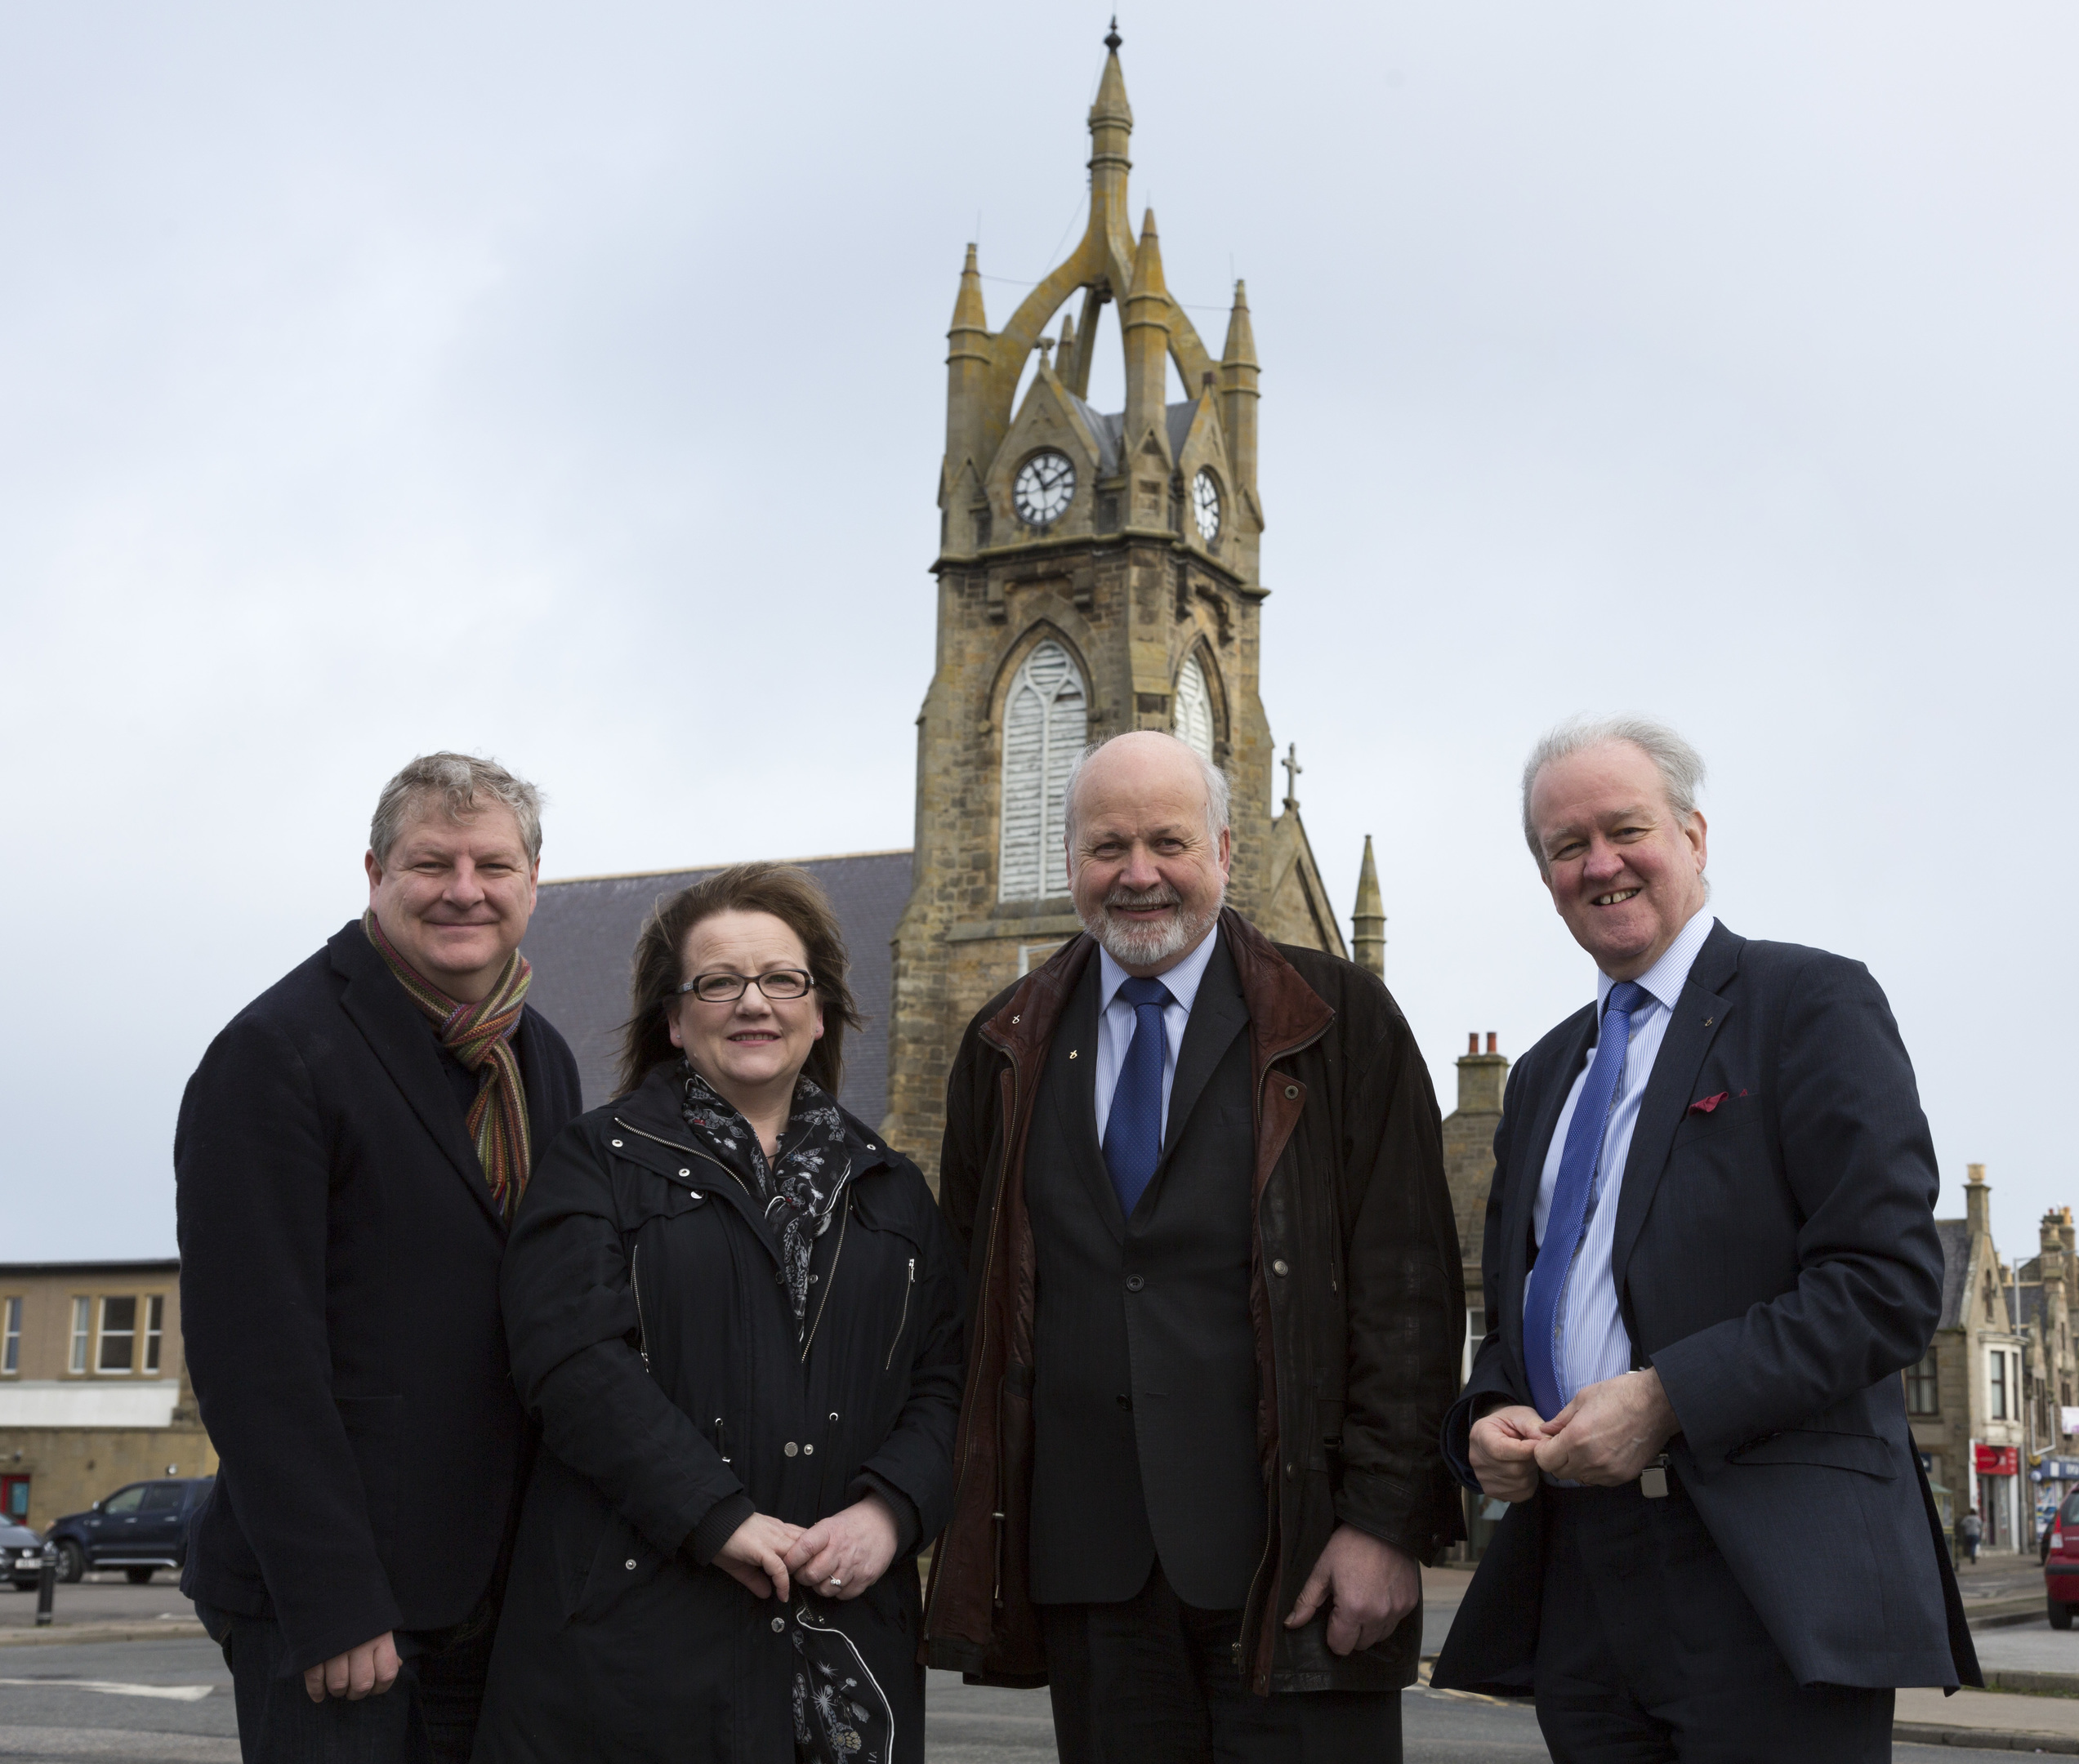 Moray MP Angus Robertson, left, and Banffshire and Buchan Coast MSP Stewart Stevenson, right, join Buckie councillors Sonya Warren and Gordon McDonald in the town's centre.